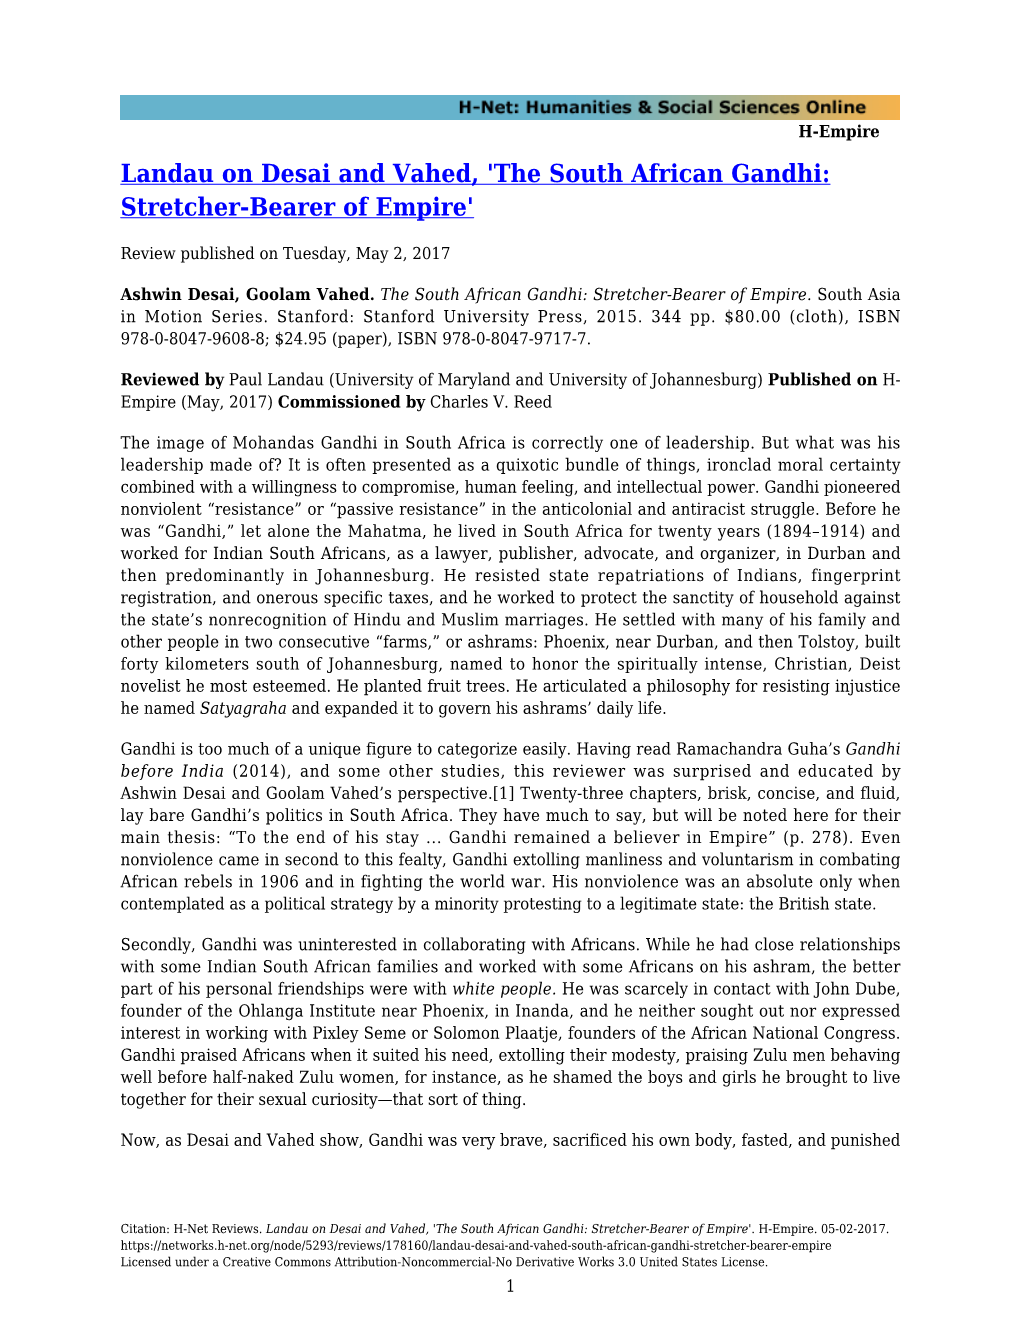 Landau on Desai and Vahed, 'The South African Gandhi: Stretcher-Bearer of Empire'